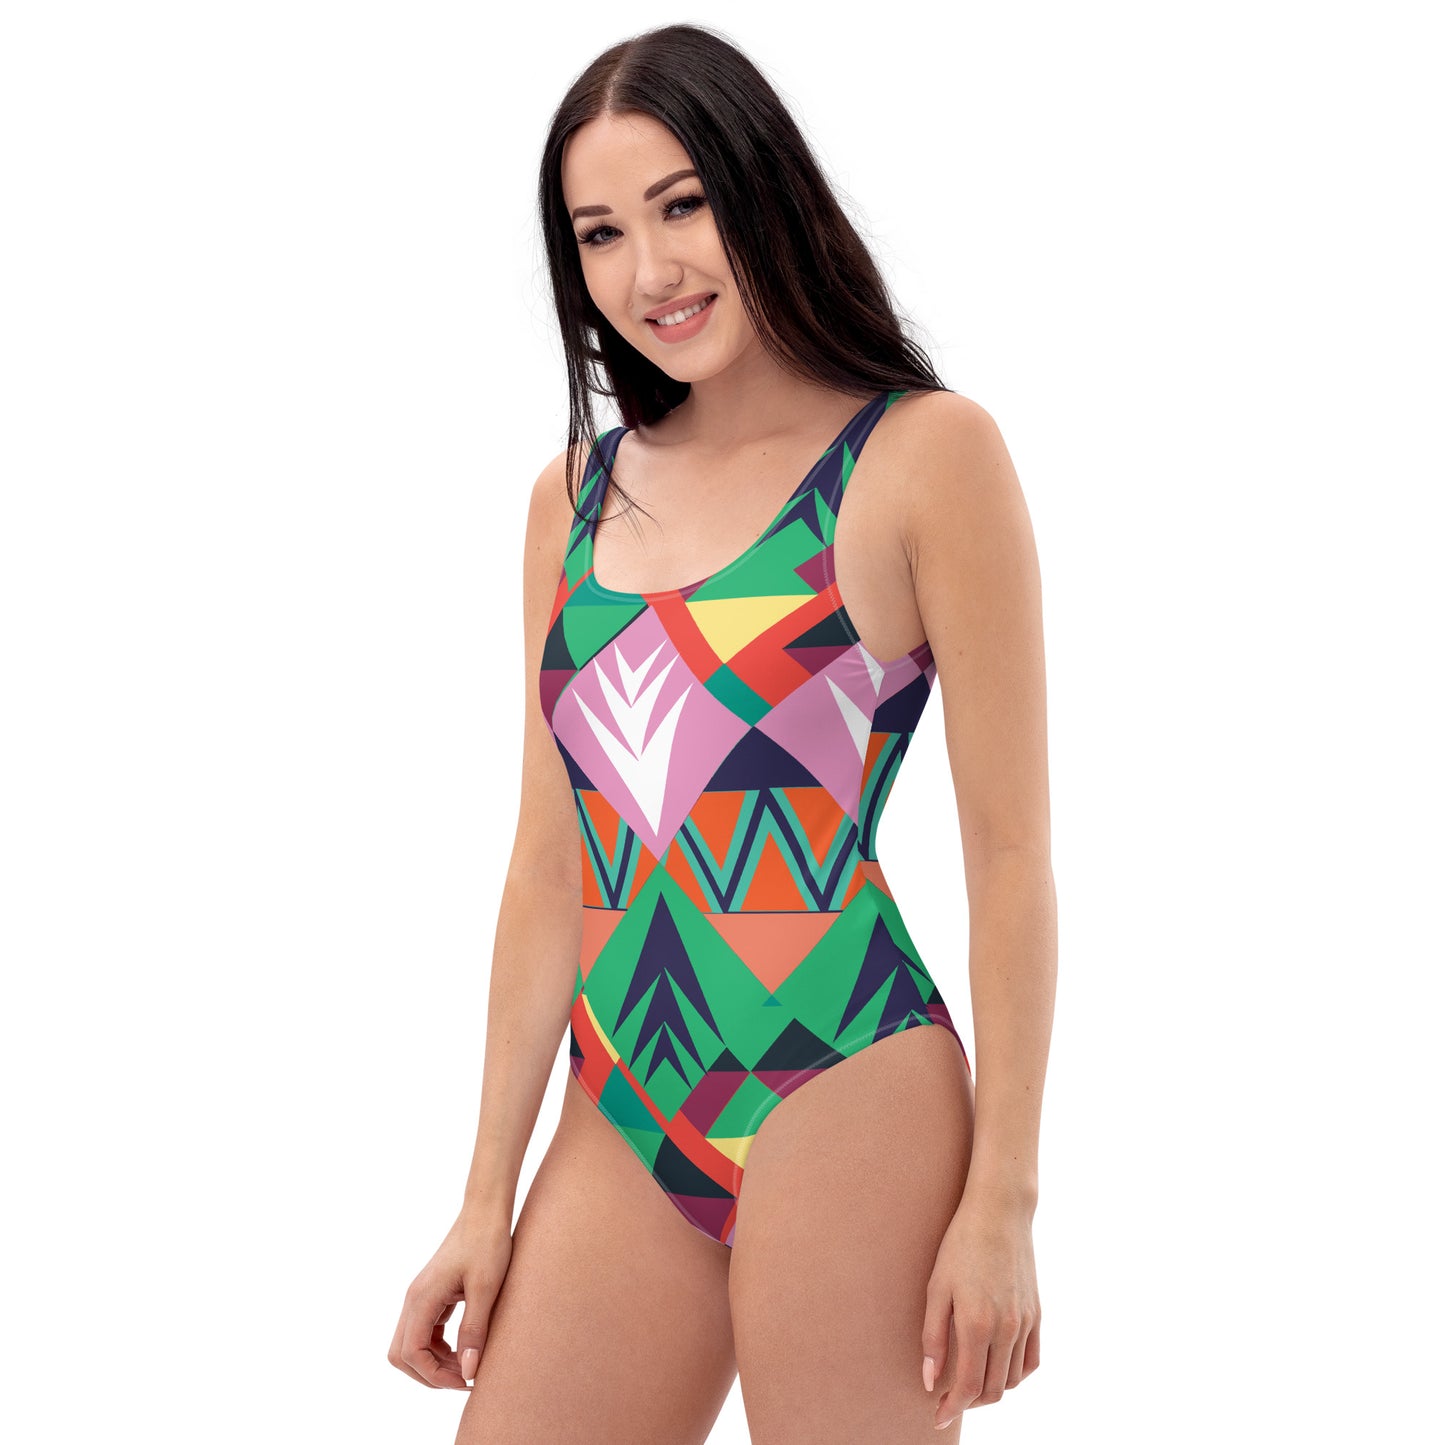 Indian swimsuit